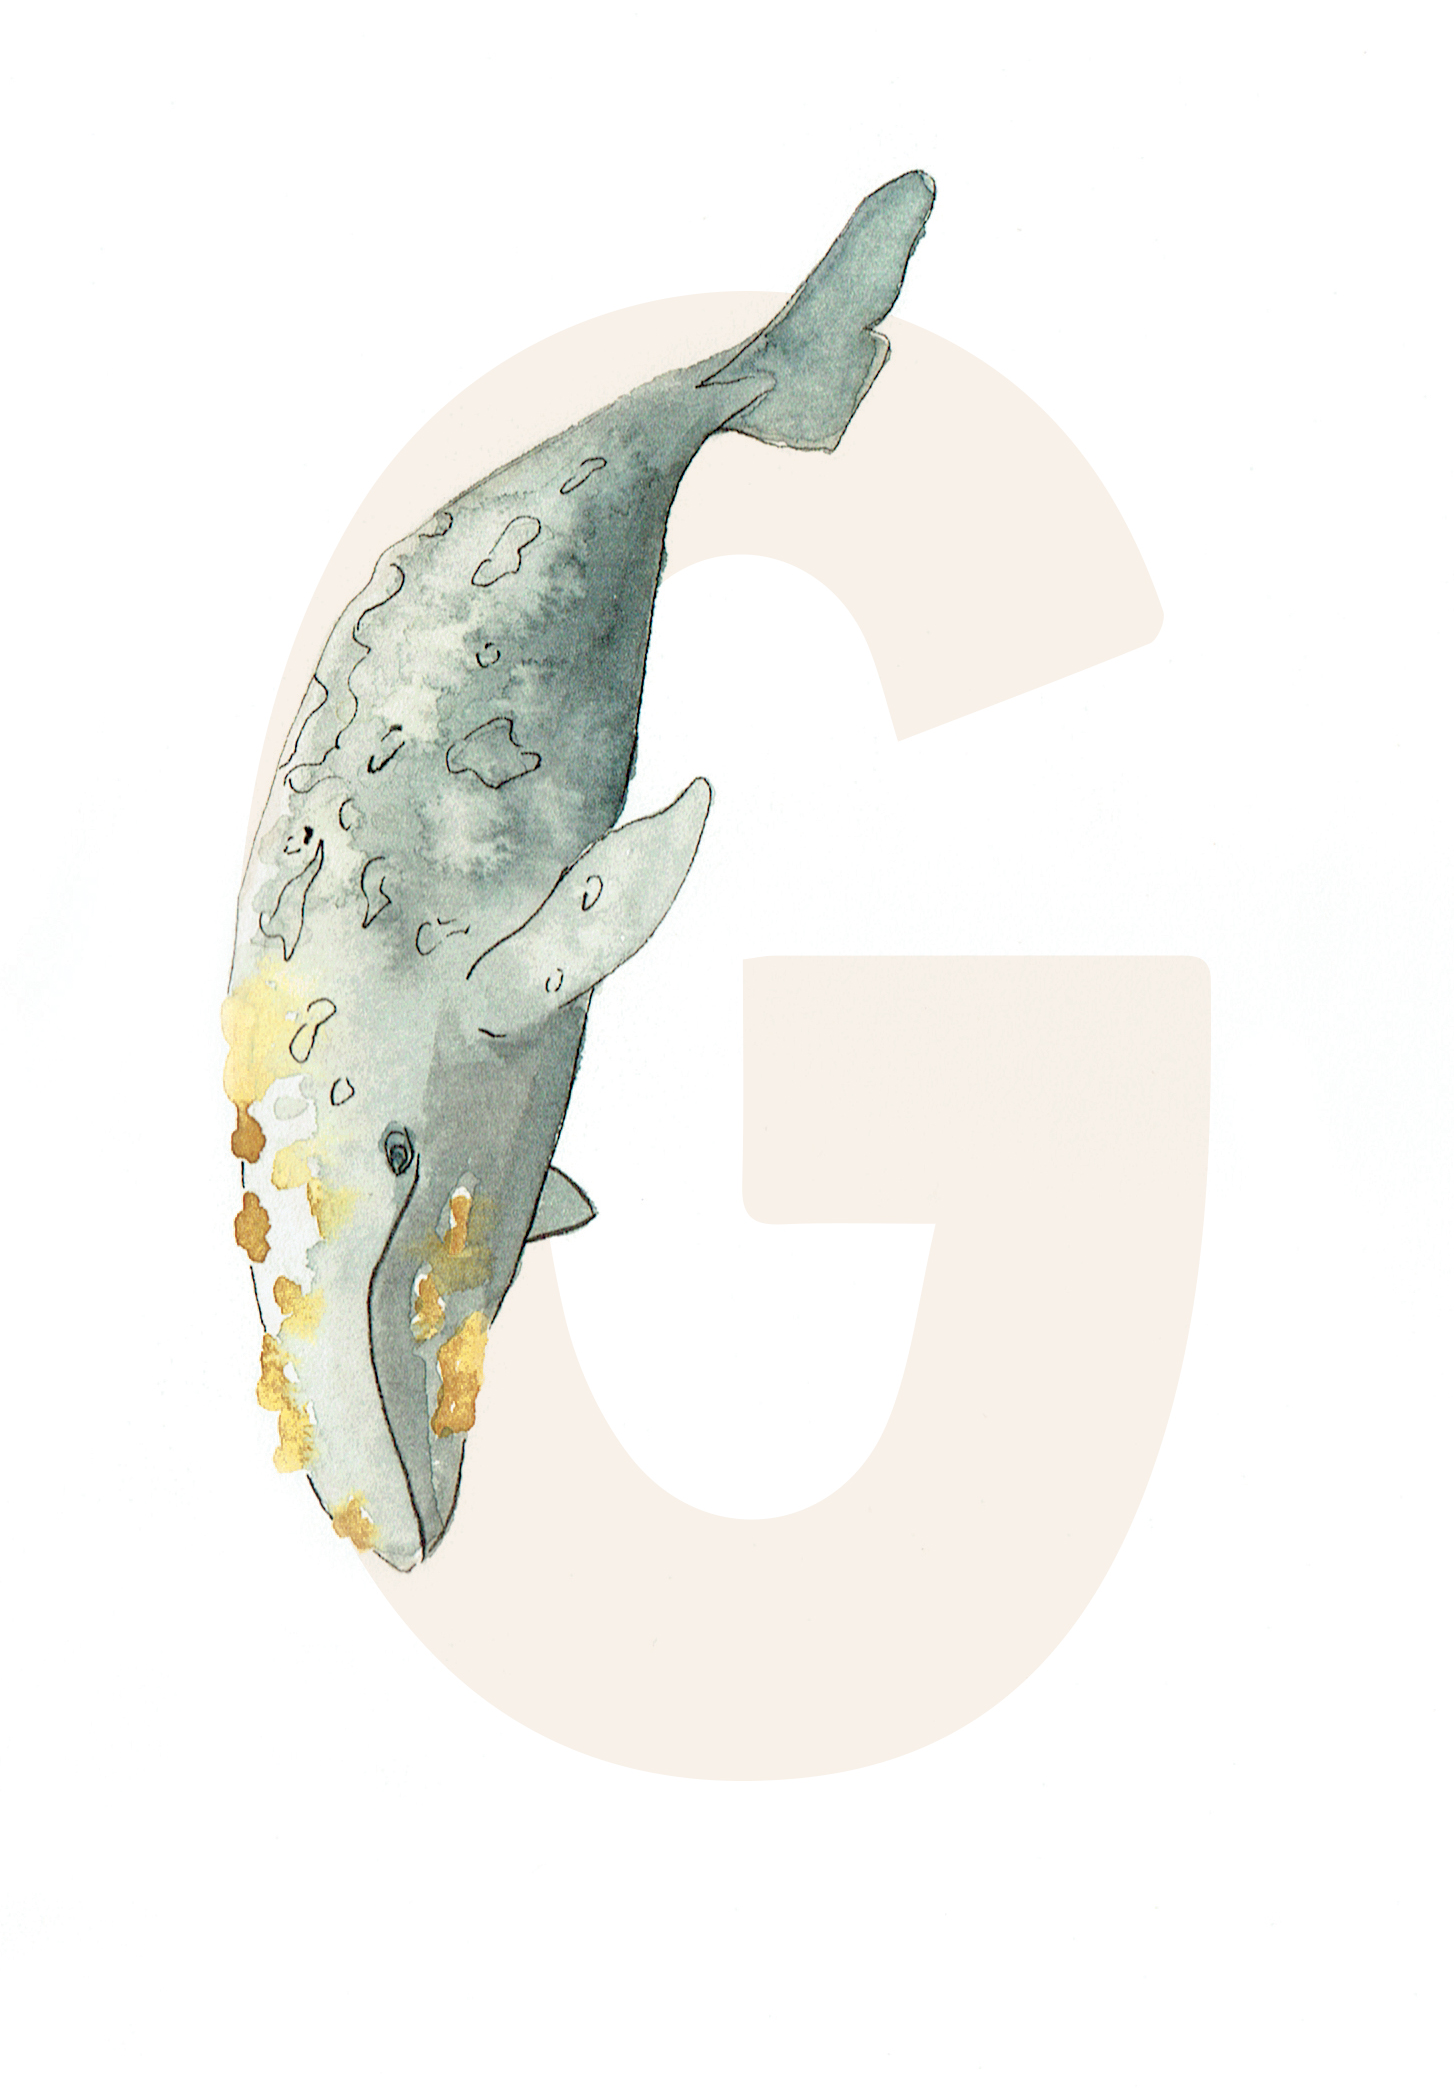 G is for Grey Whale